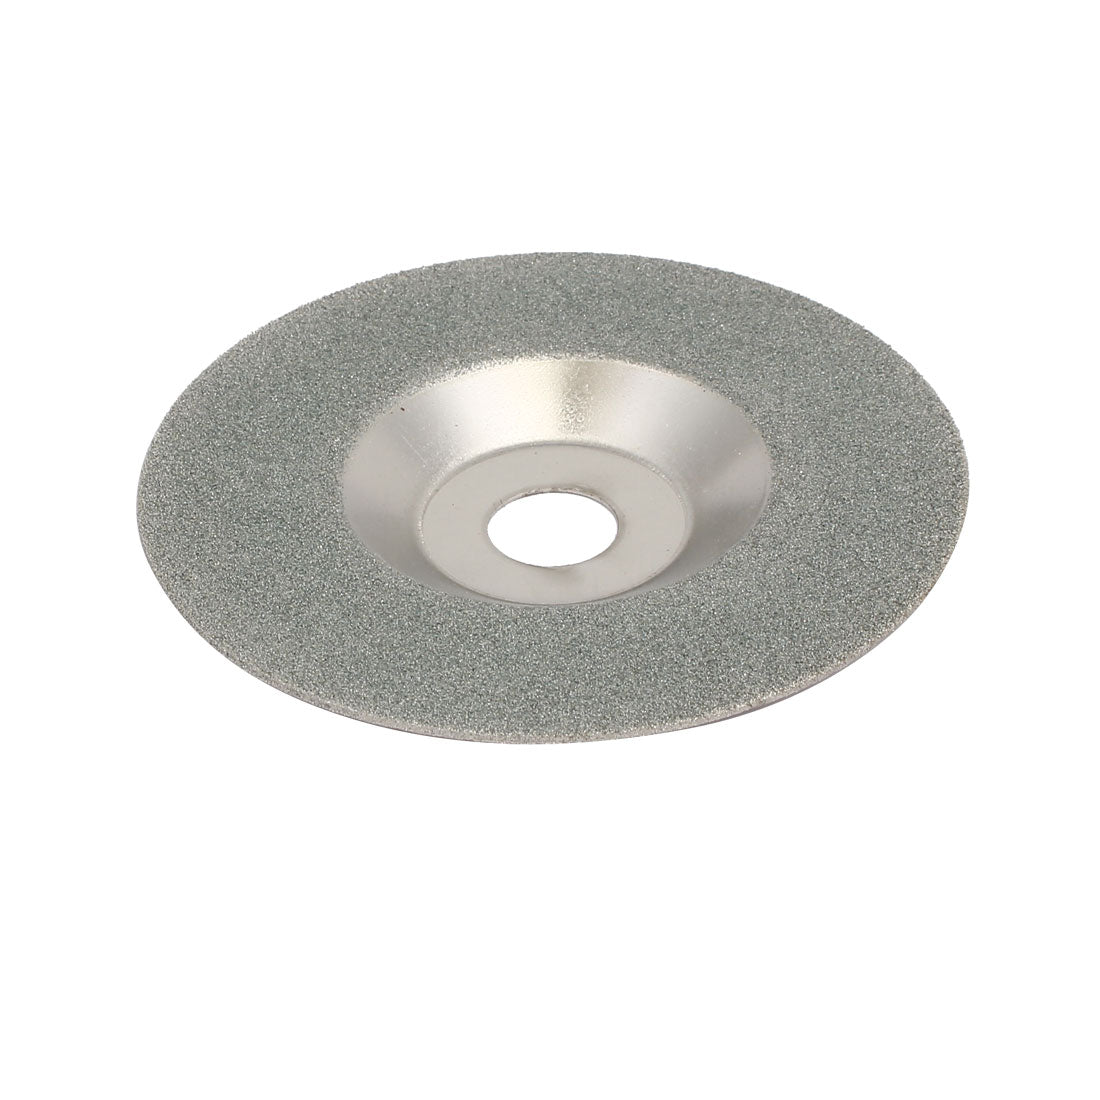 uxcell Uxcell Glass Ceramic Cup Shaped Polishing Grinding Wheel Disc Silver Tone 4'' Dia